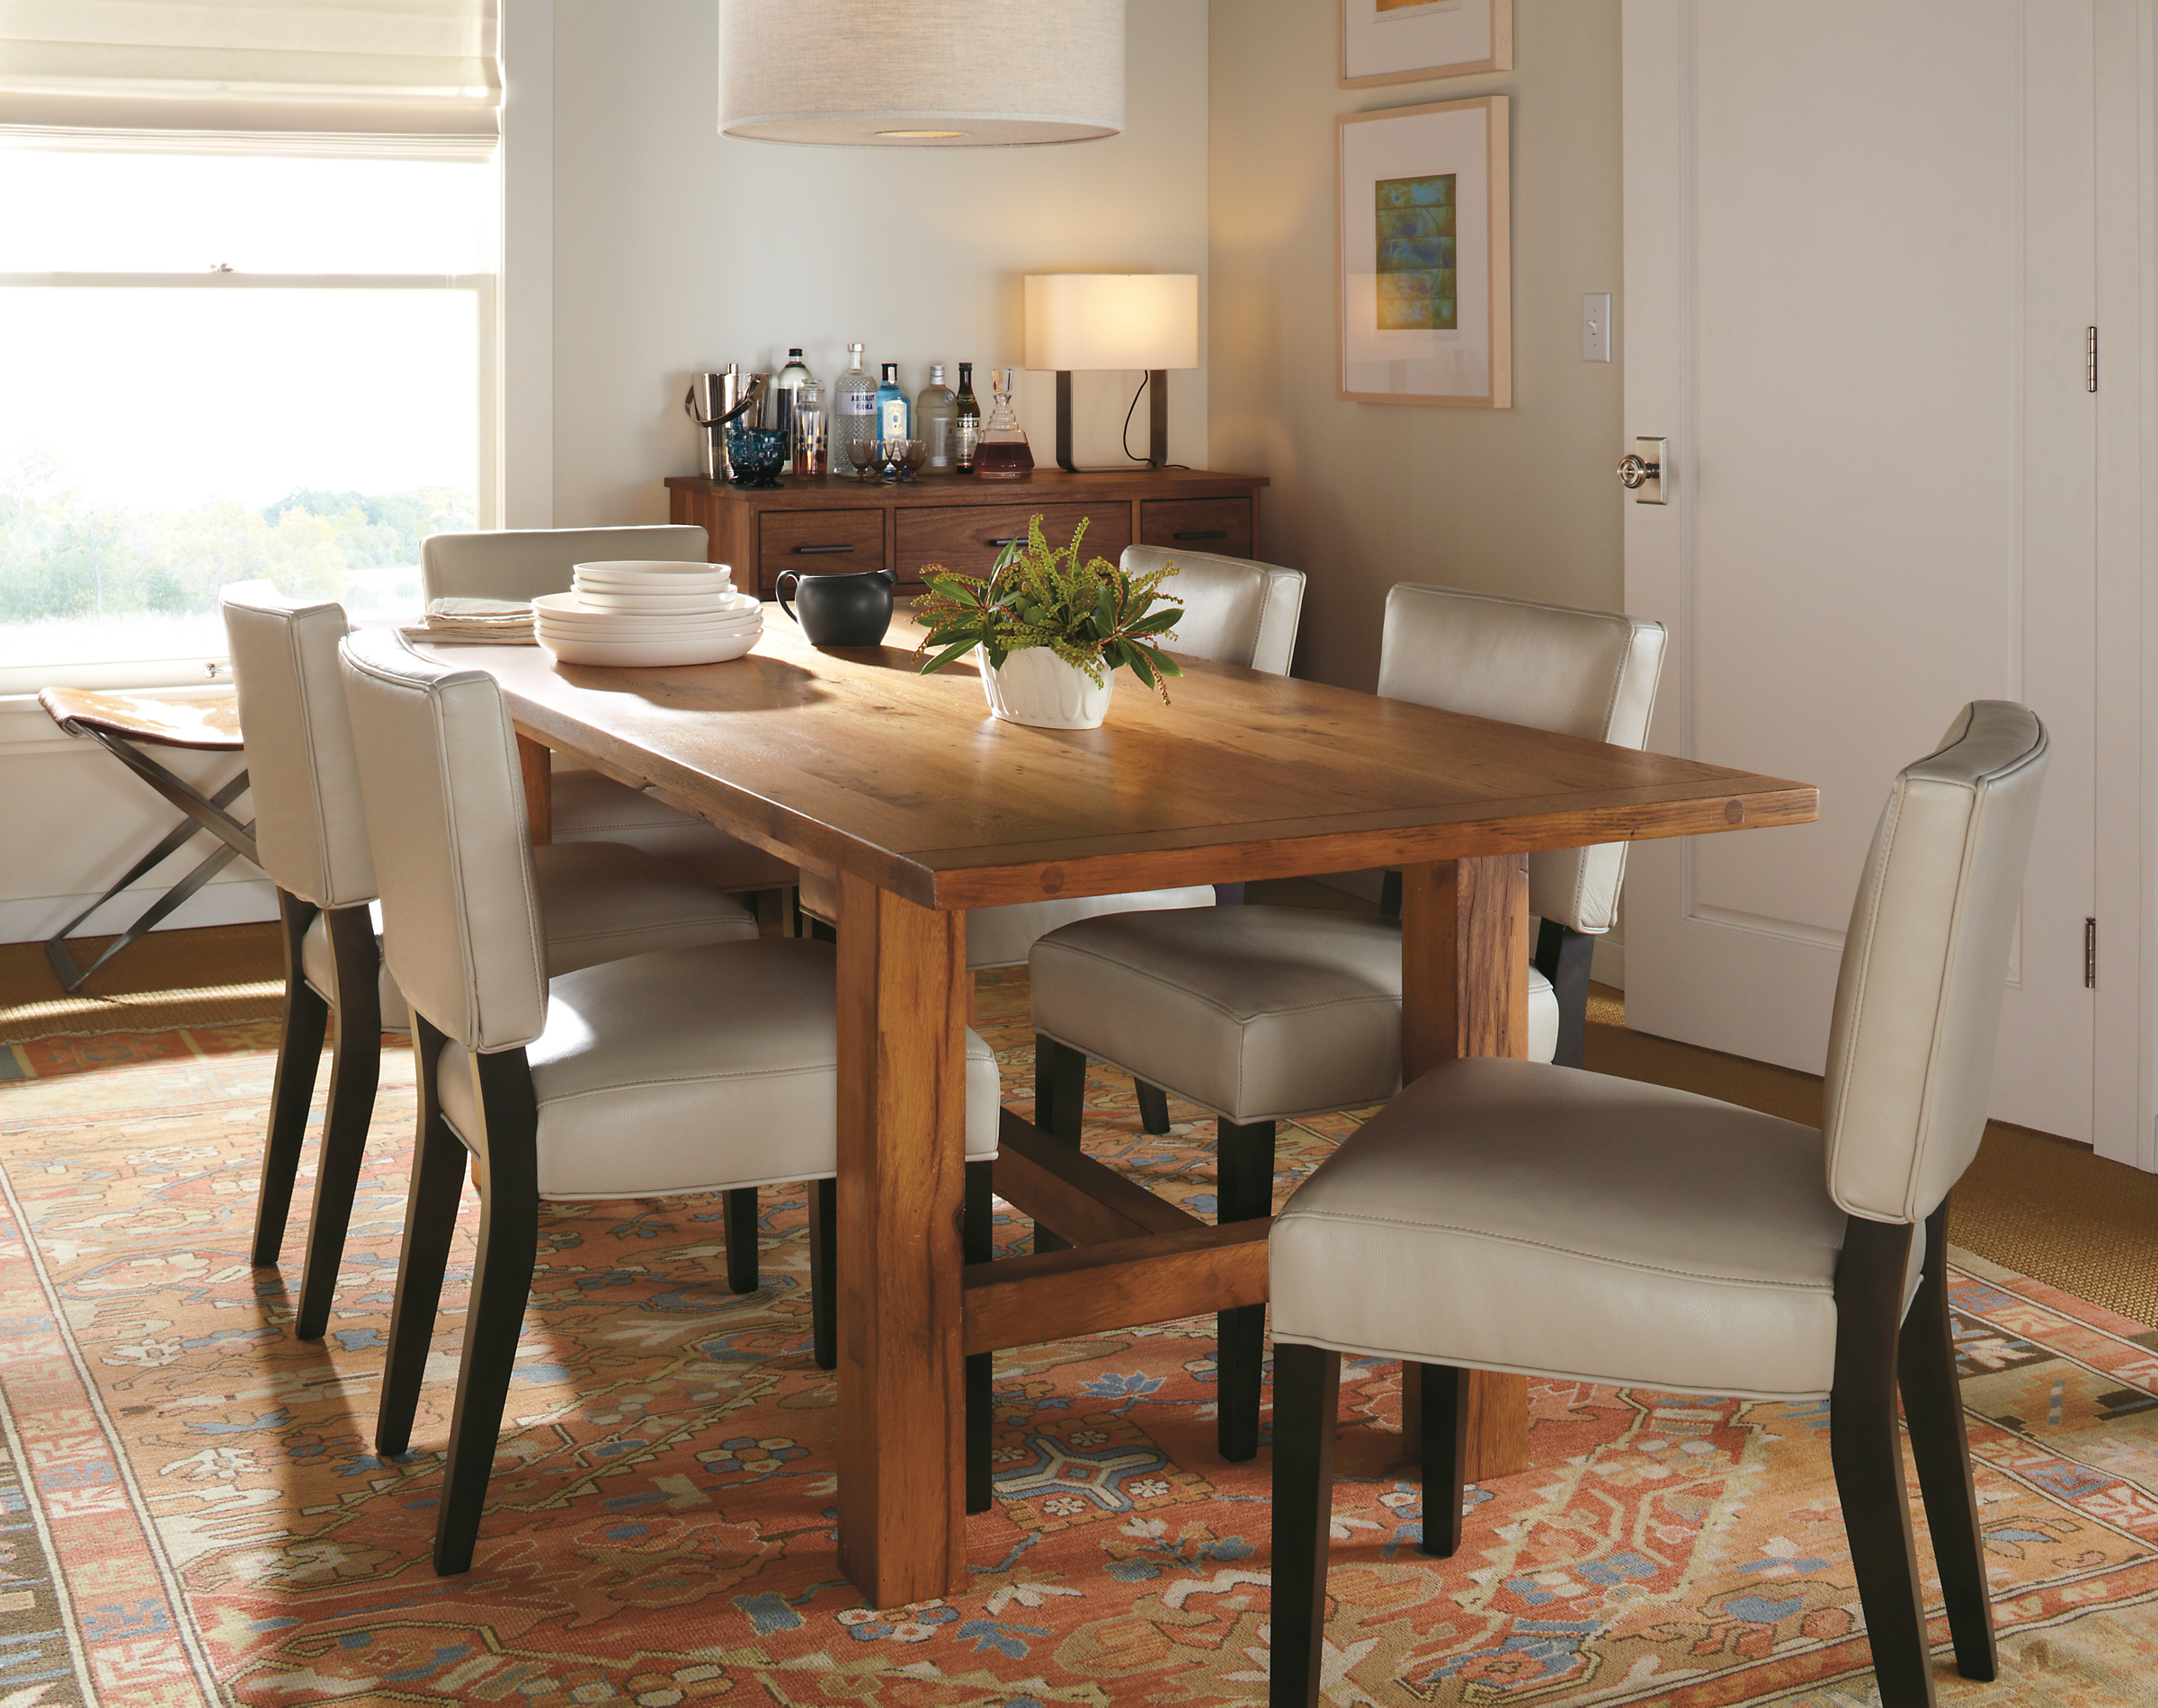 Dining room with Georgia chair in urbino ivory.